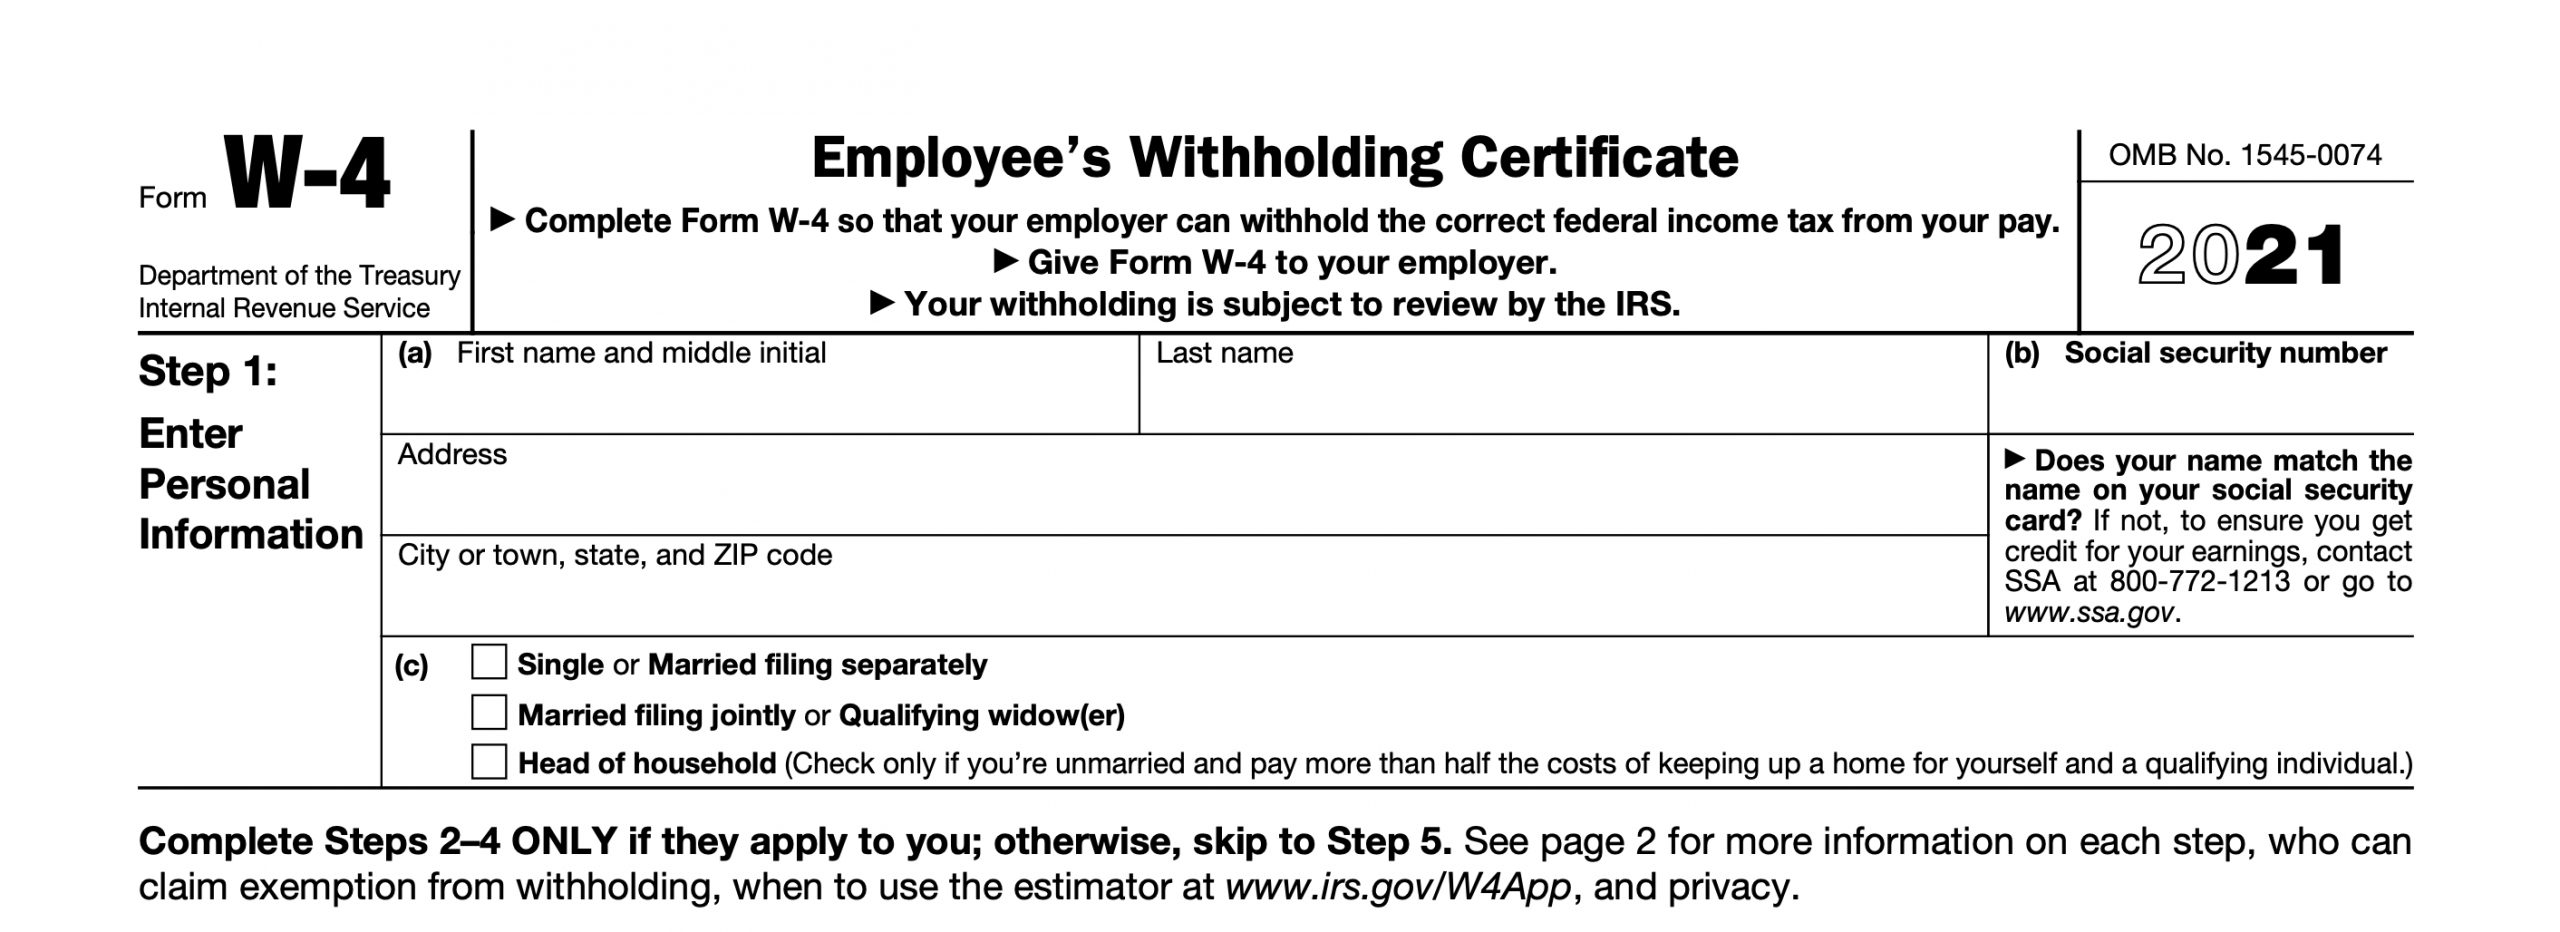 2021 Irs Form W-4: Simple Instructions + Pdf Download-2021 Printable Irs Forms W-4